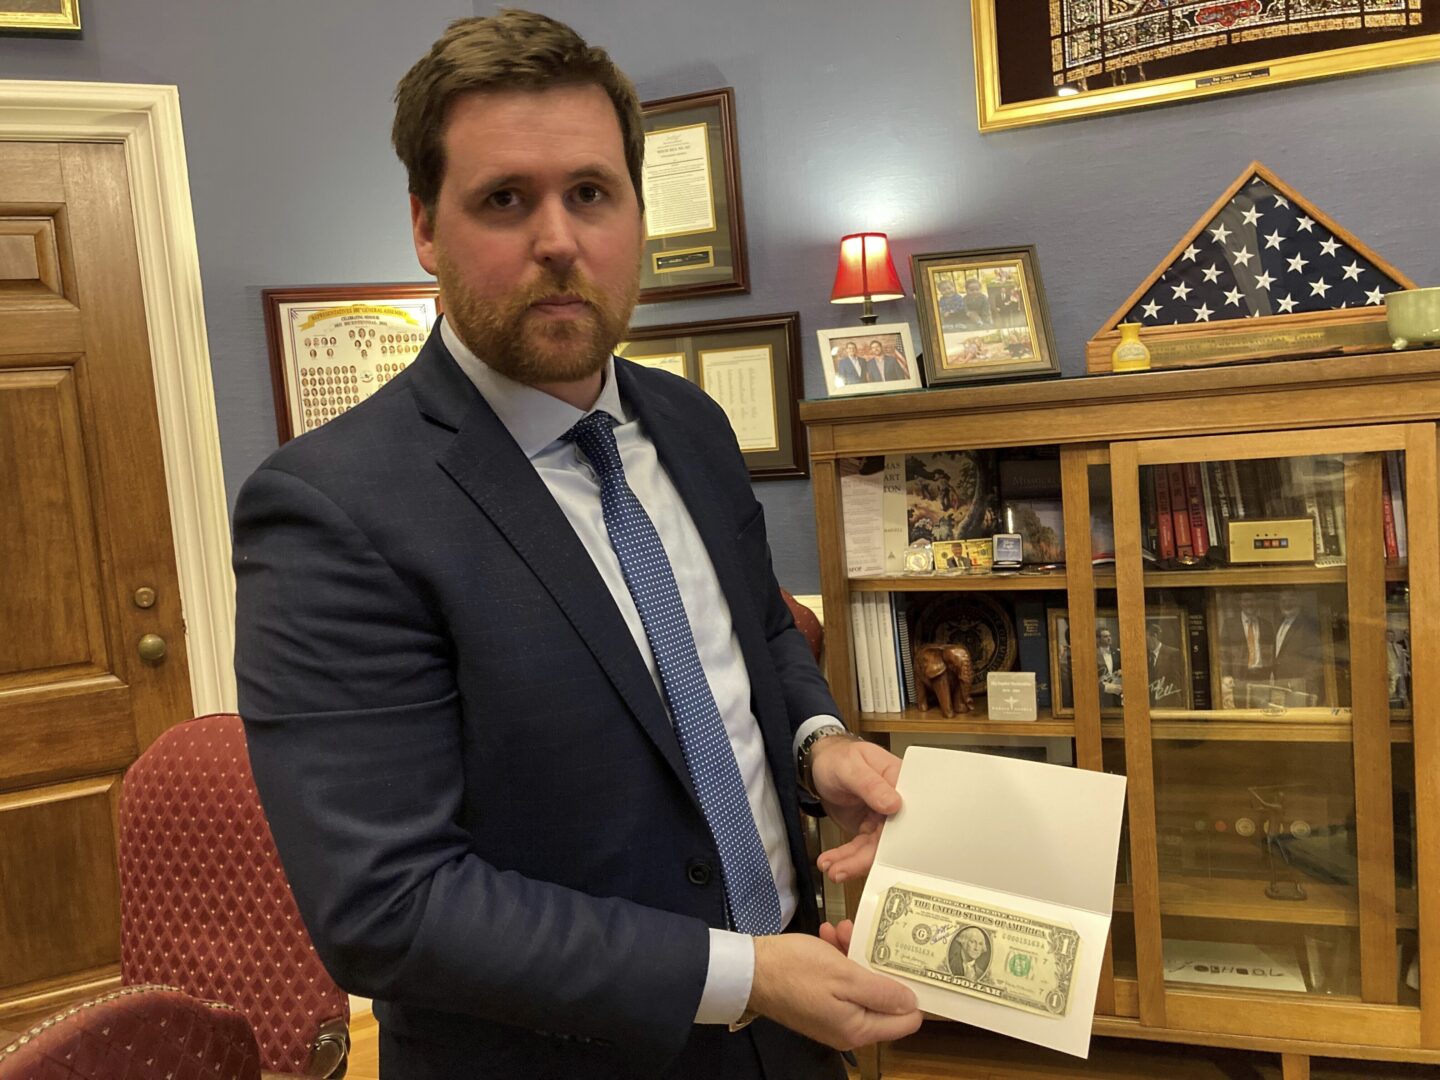 Missouri Treasurer Scott Fitzpatrick displays a $1 bill signed by the former treasurer of the United States on Thursday, Dec. 15, 2022, at his Capitol office in Jefferson City, Mo. Due partly to rising interest rates, Missouri had earned more than $116 million on investments through the first five months of its current fiscal year — nearly double the amount earned the entire previous year.